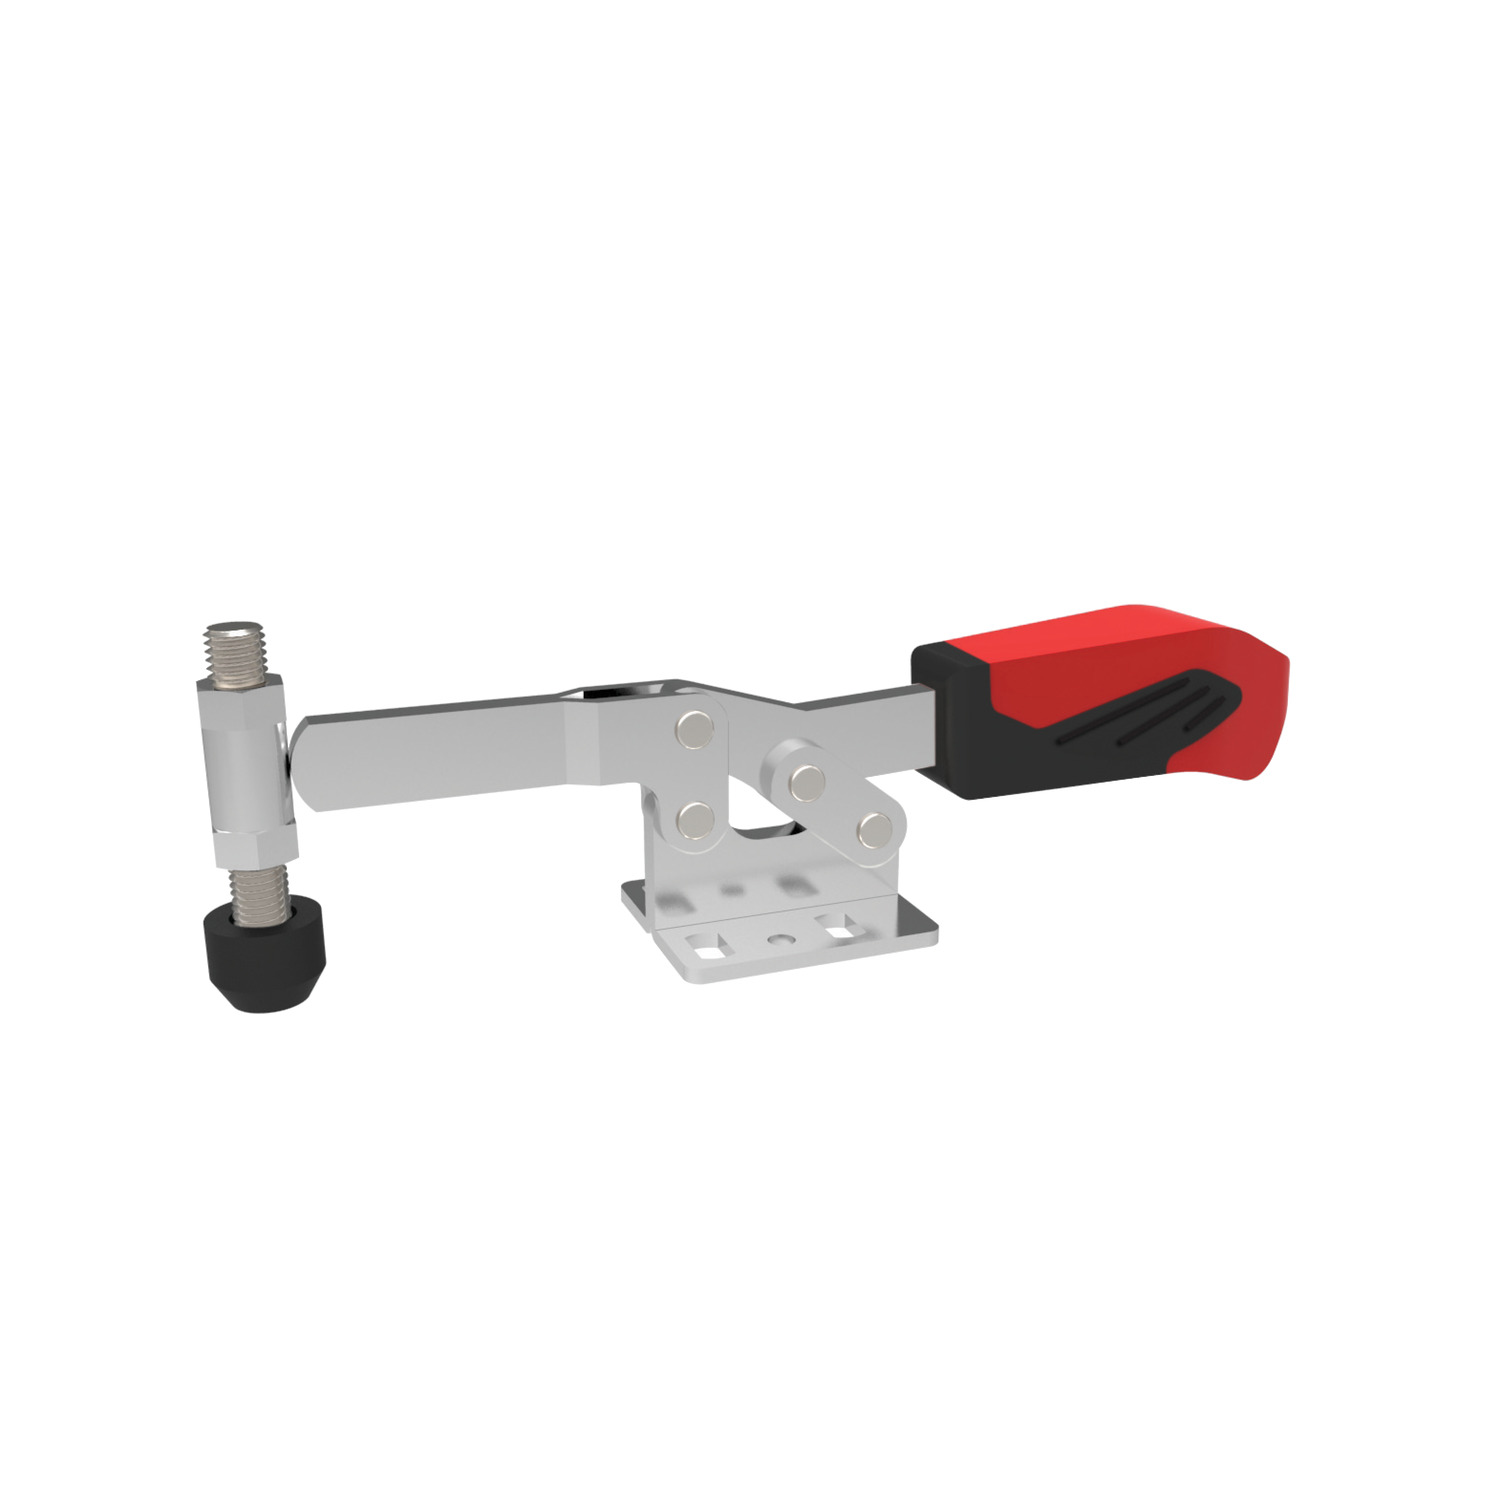 41030 - Horizontal Acting Toggle Clamps